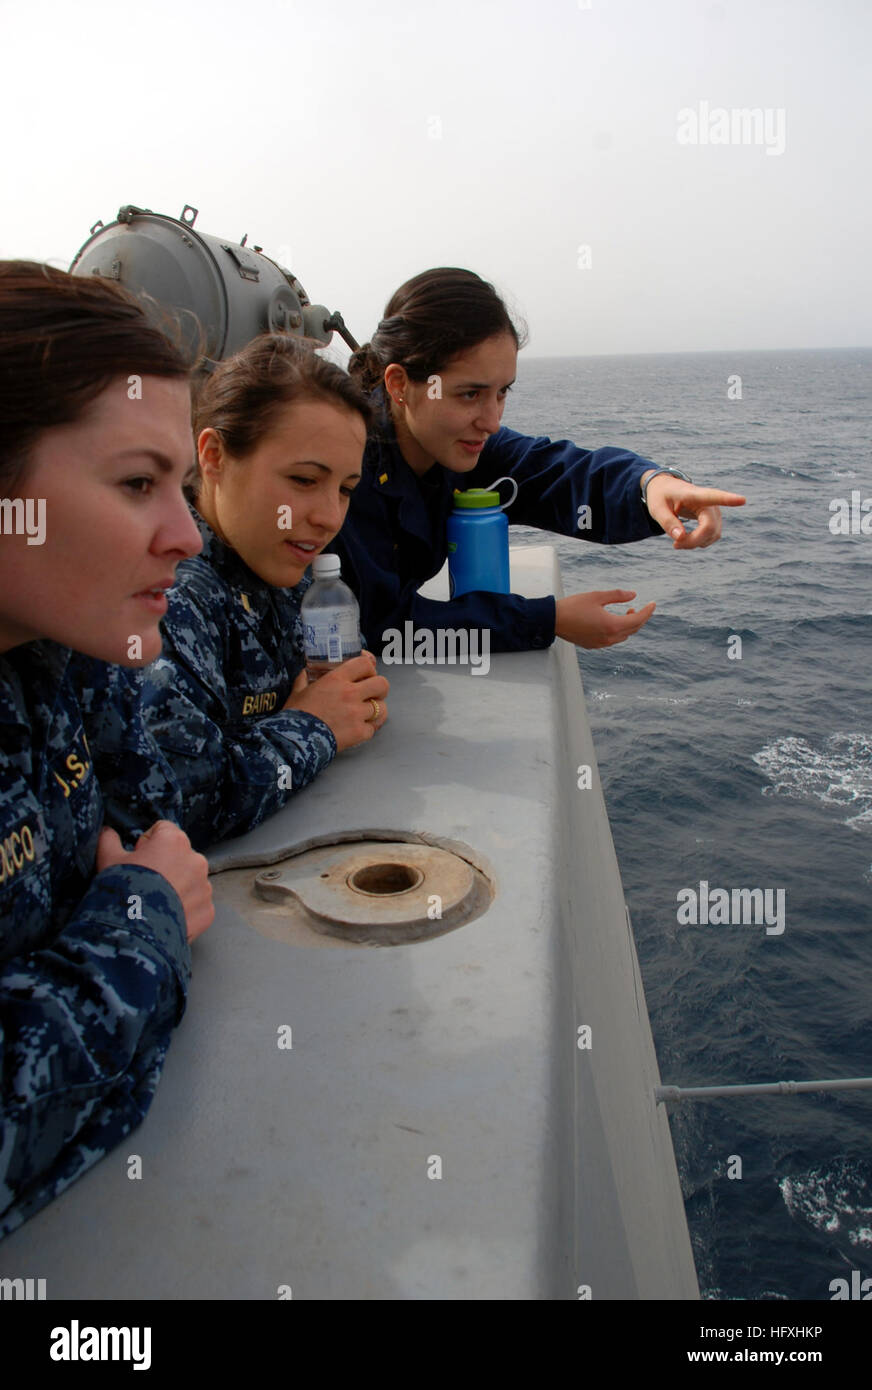 130325-N-BB534-054 U.S. 5TH FLEET AREA OF RESPONSIBILITY (Mar. 25, 2013) Ensign Kathryn Yanez points out features in the boat valley to visiting junior officers Ensign Jane Baird (center) and Ensign Ryan Scirocco aboard the amphibious transport dock ship USS Green Bay (LPD 20).  Green Bay is part of the Peleliu Amphibious Ready Group and, with embarked 15th Marine Expeditionary Unit, is deployed in support of maritime security operations and theater security cooperation efforts in the U.S. 5th Fleet area of responsibility. (U.S. Navy photo by Mass Communication Specialist 1st Class Elizabeth M Stock Photo